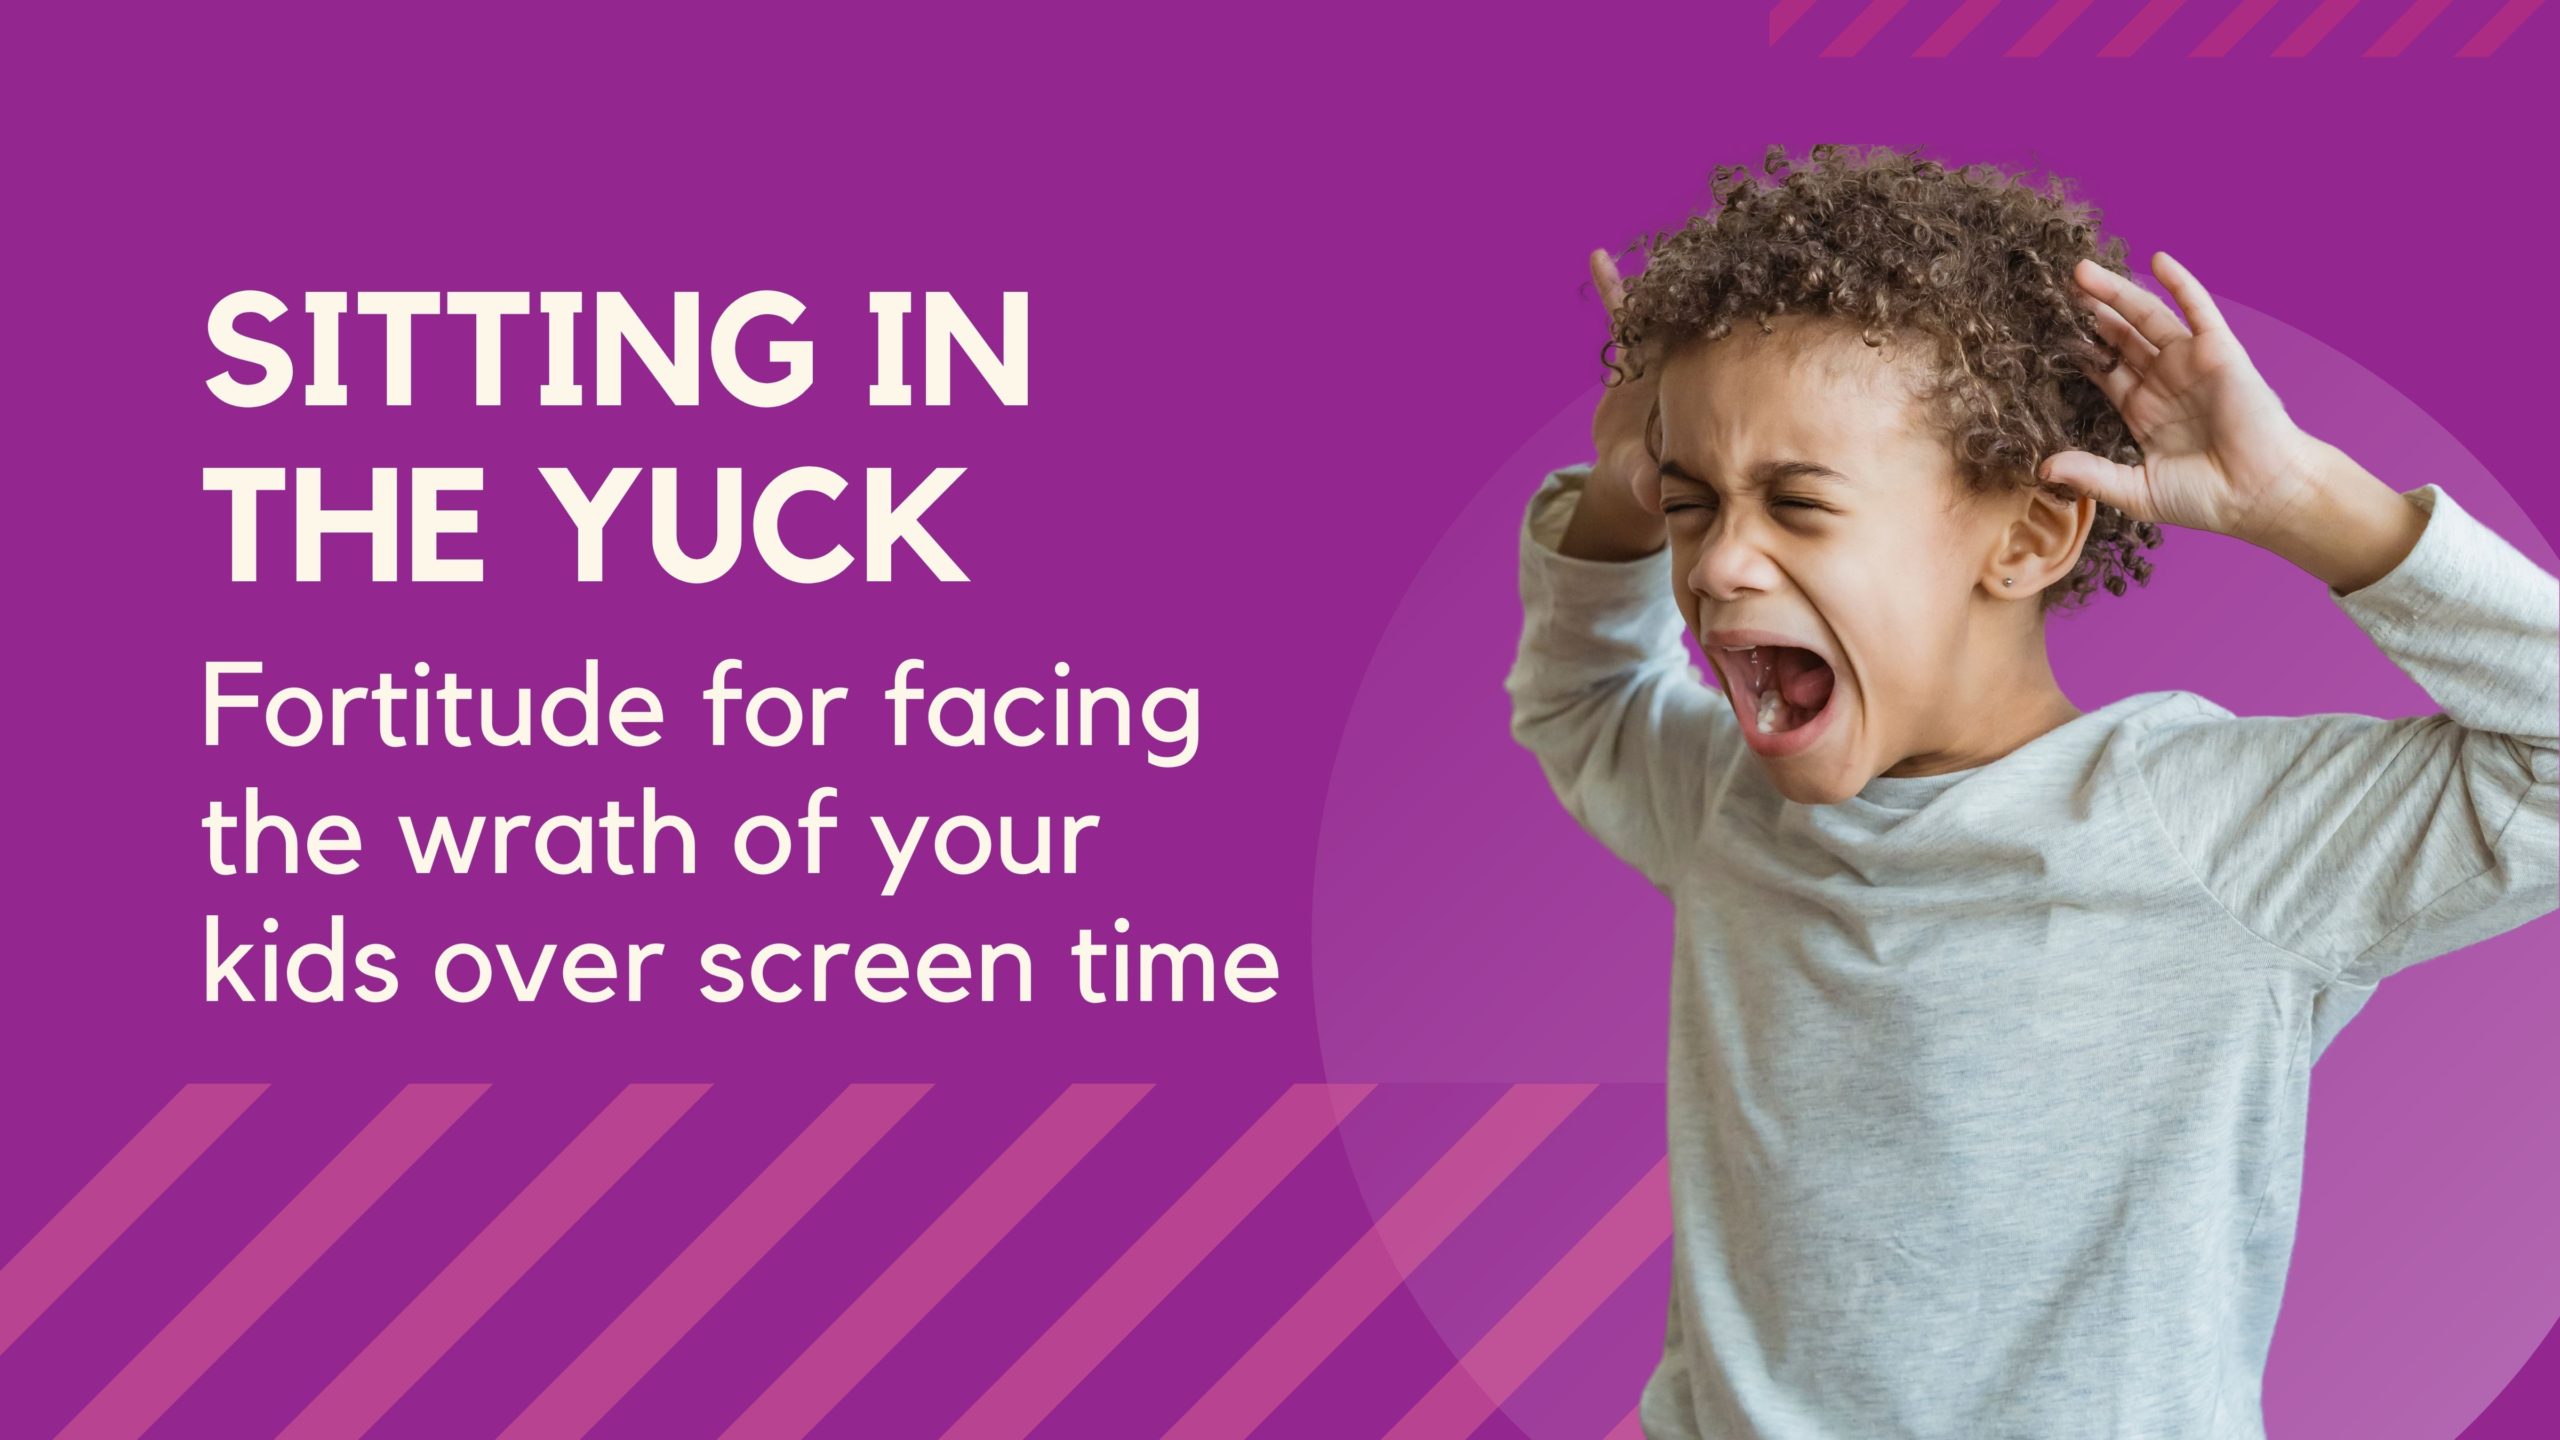 Parents and kids are bound to sometimes disagree over screen time